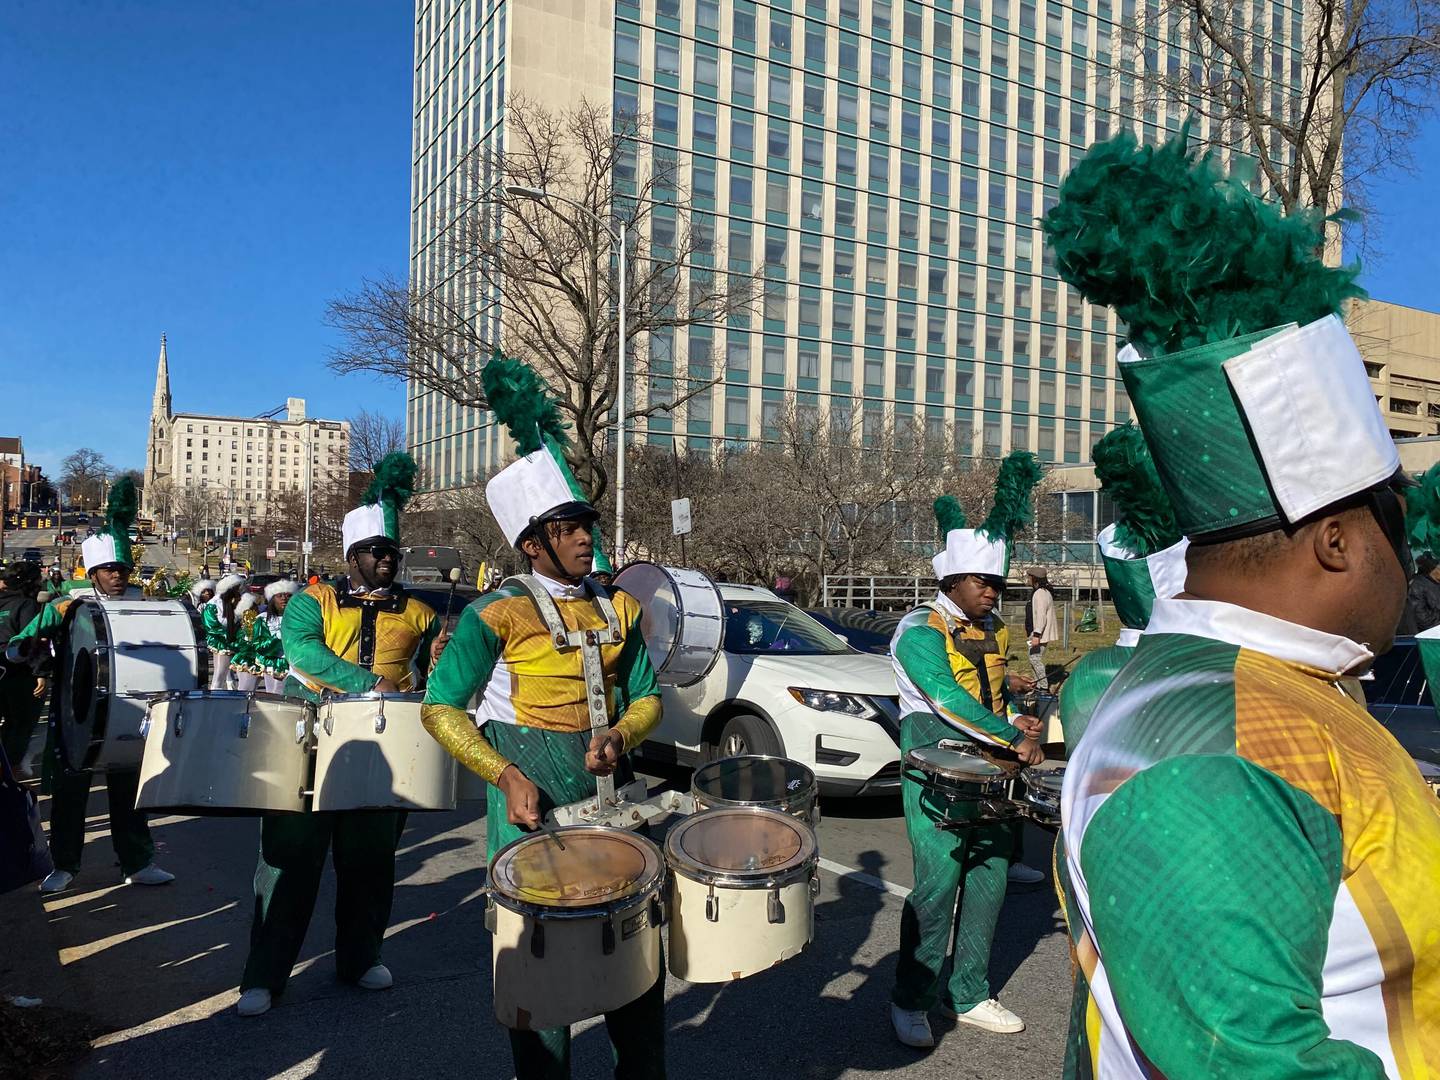 Members of the Baltimore Twilighters, a nonprofit community marching band, take part in Baltimore's MLK Day parade under blue skies on Jan. 16, 2022.